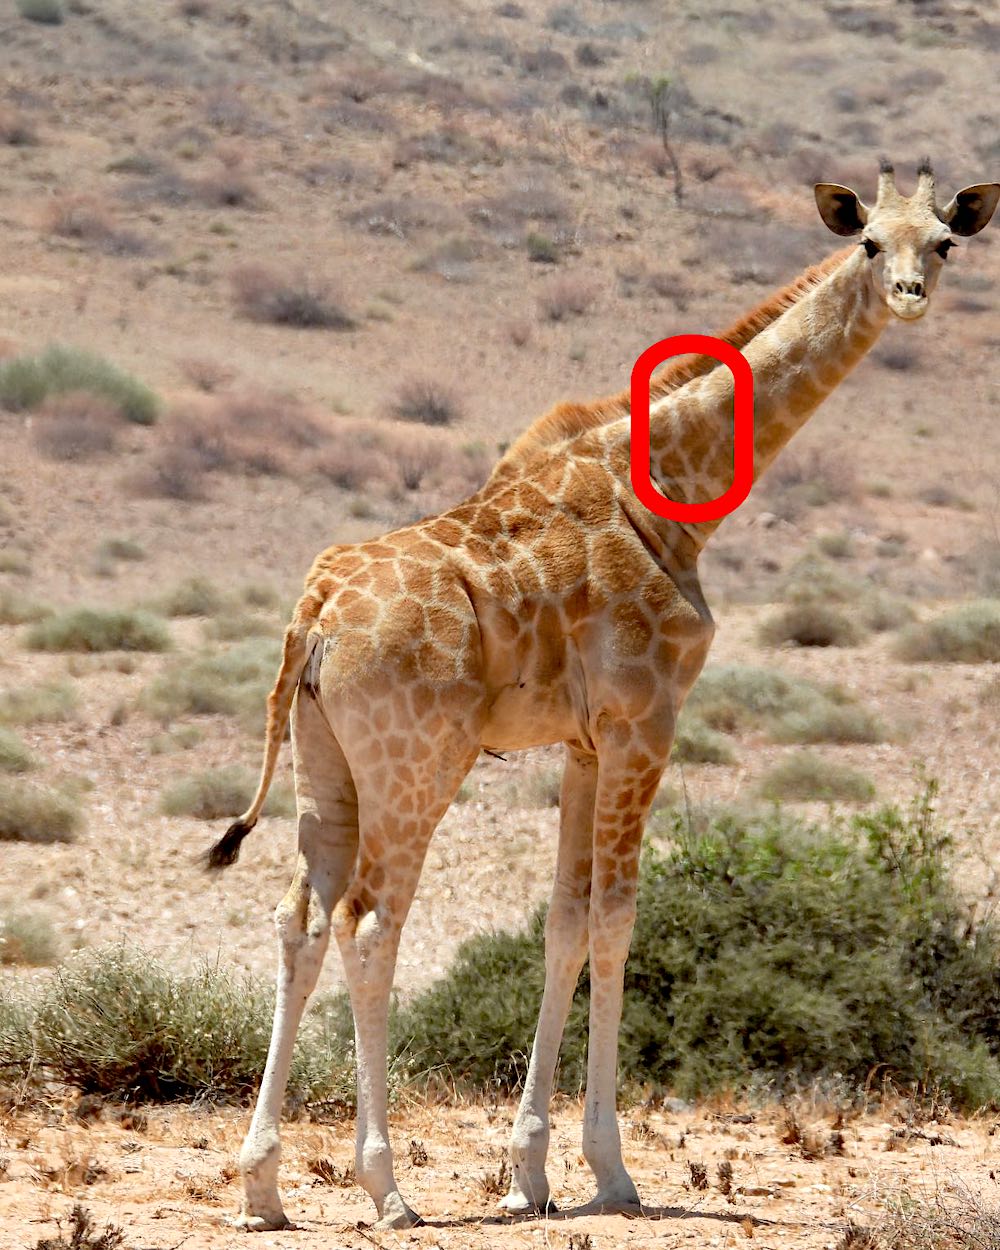 Calf with a similar arrow shape to her mother on her neck.